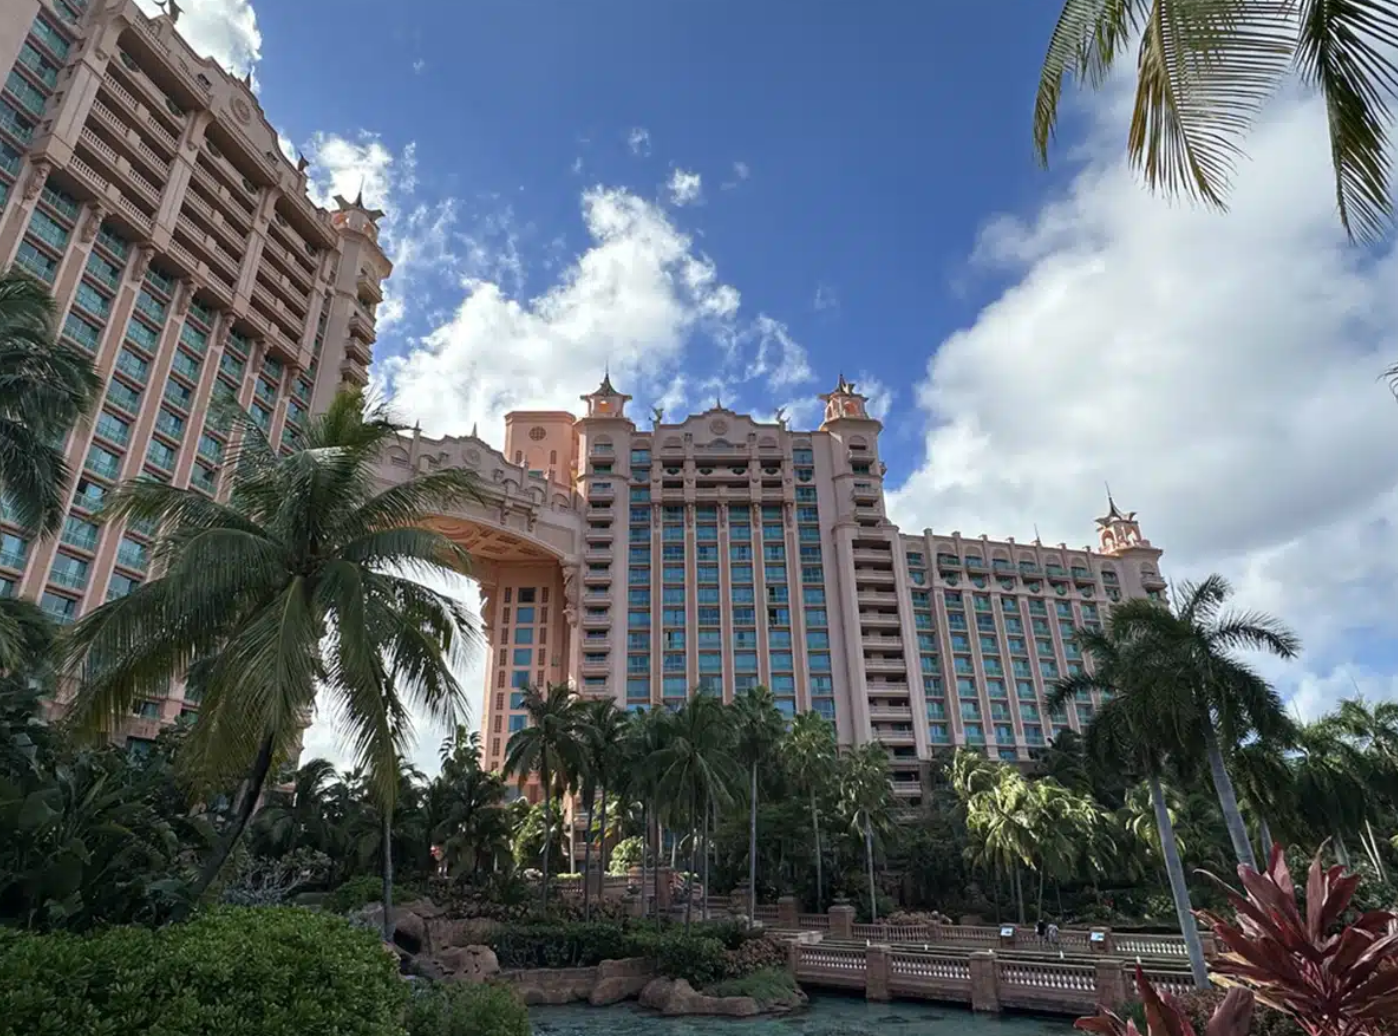 The Bahamas’ Atlantis Paradise Island Just Completed a $150M Renovation